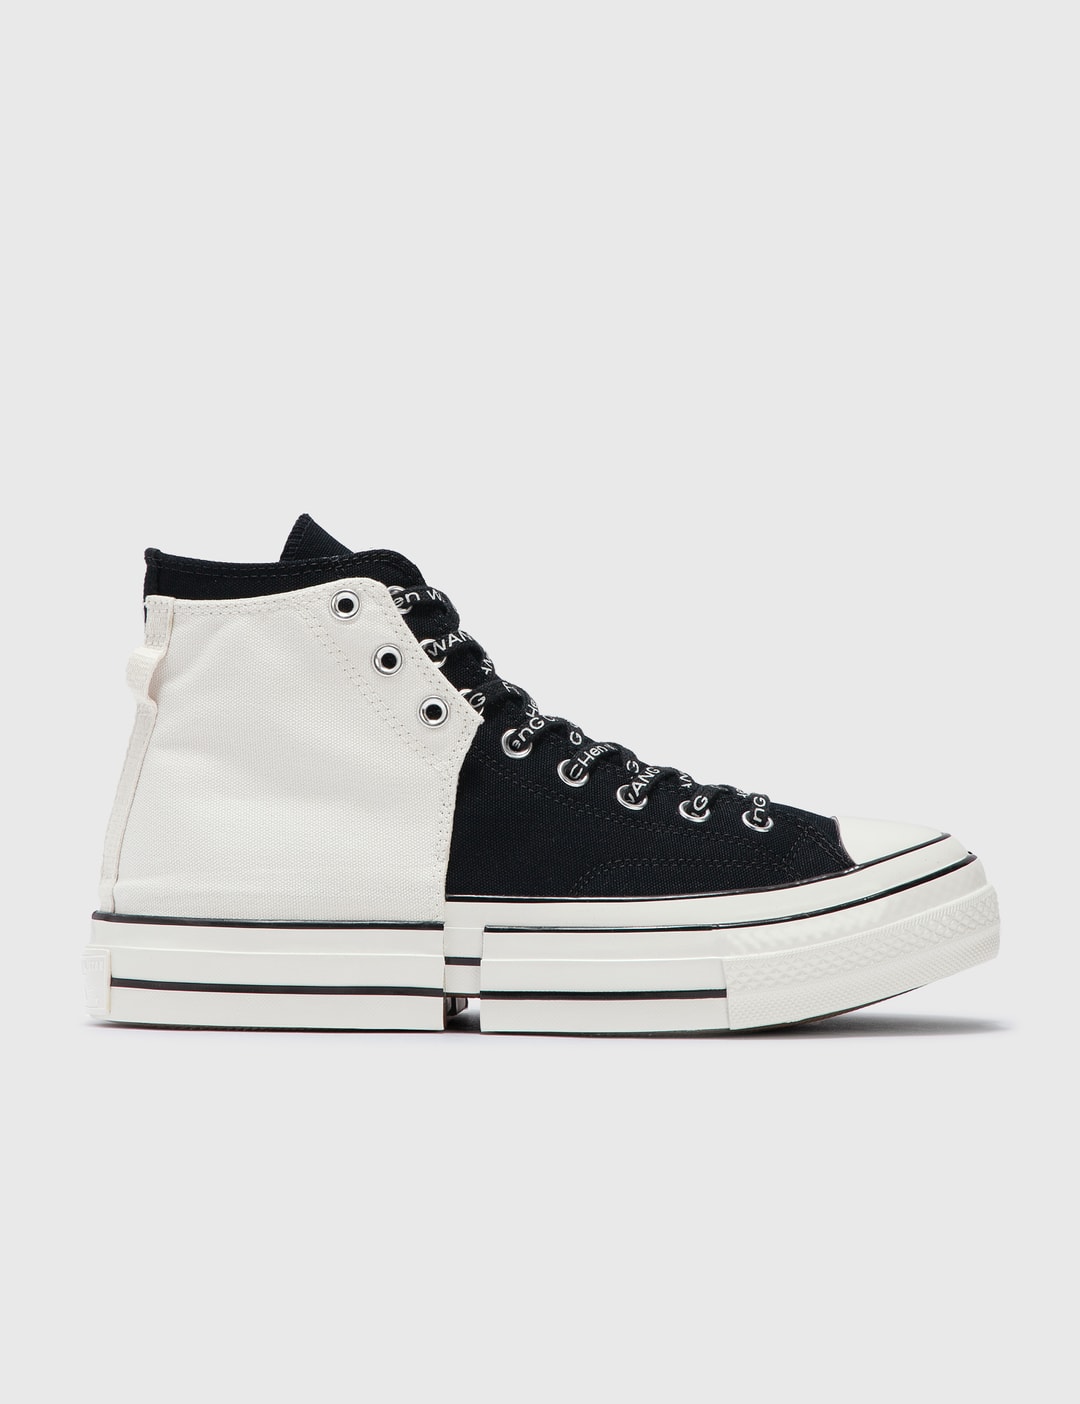 Converse - Converse x Feng Chen Wang Chuck 70 Hi 2 In 1 | HBX - Globally  Curated Fashion and Lifestyle by Hypebeast